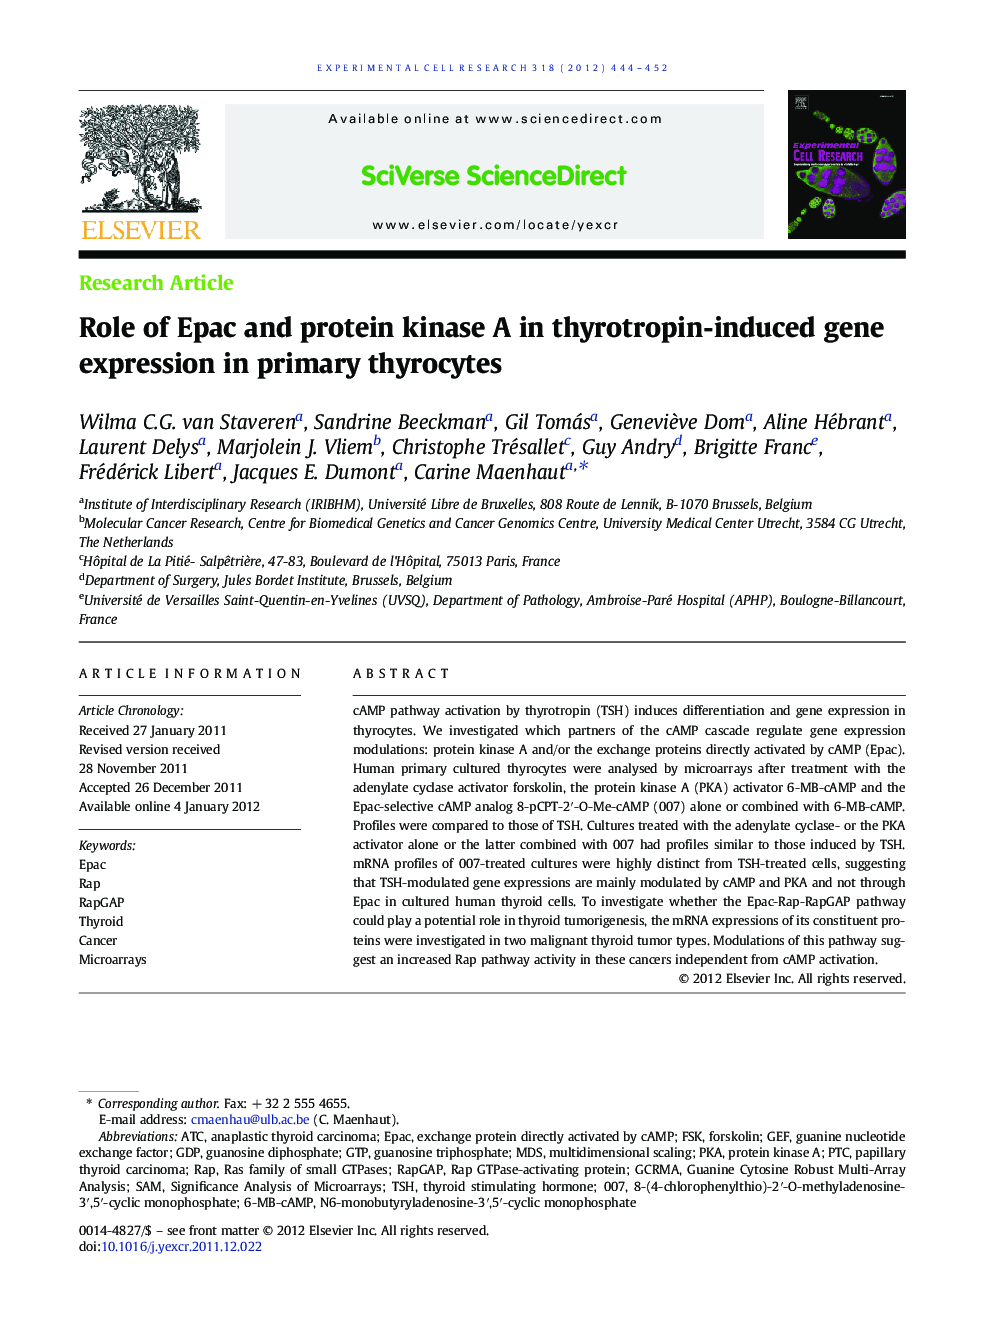 Role of Epac and protein kinase A in thyrotropin-induced gene expression in primary thyrocytes